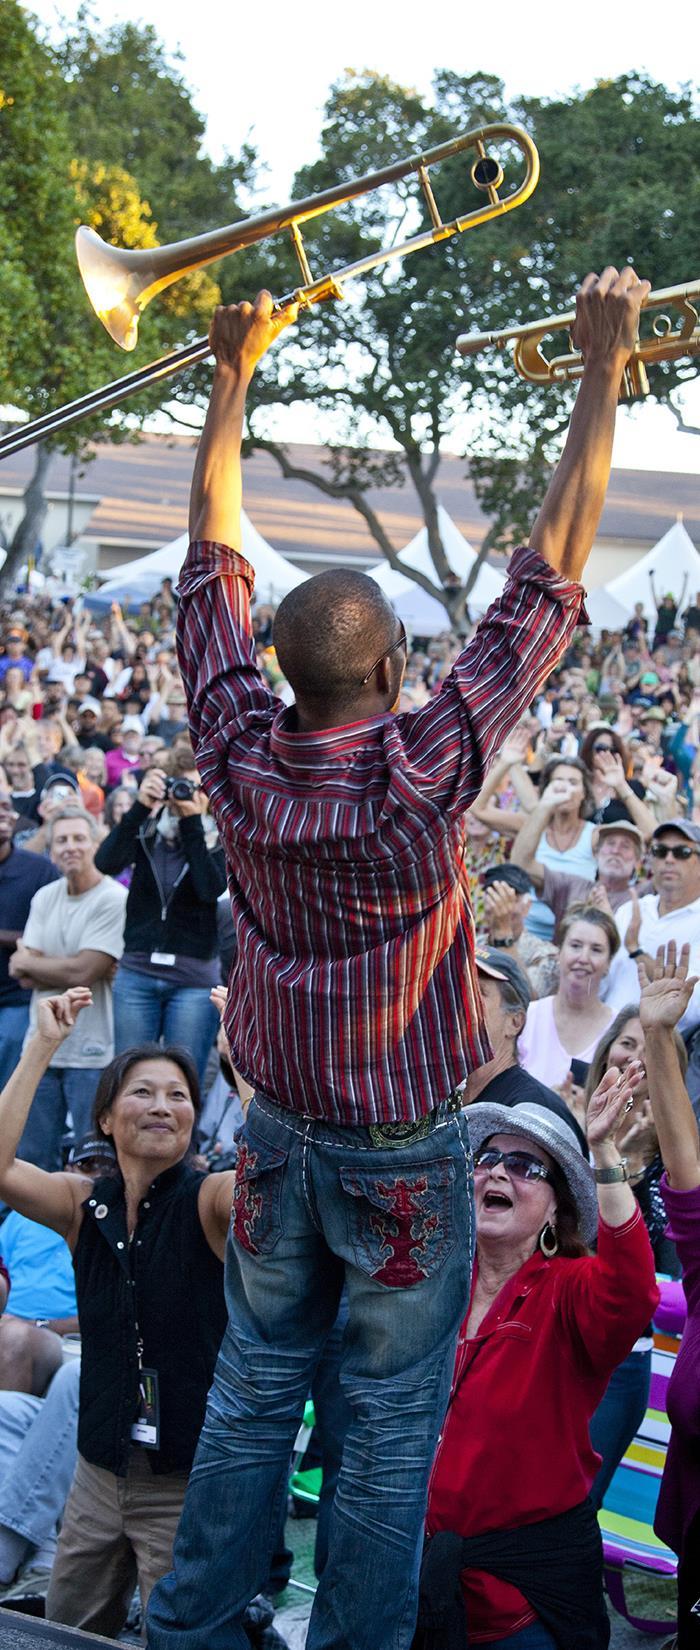 Monterey Jazz Festival Venues The Garden Stage (pictured) The Festival s prime outdoor venue offers a high visibility garden setting, packed with 1,500 fans at every show, enjoying music, food,